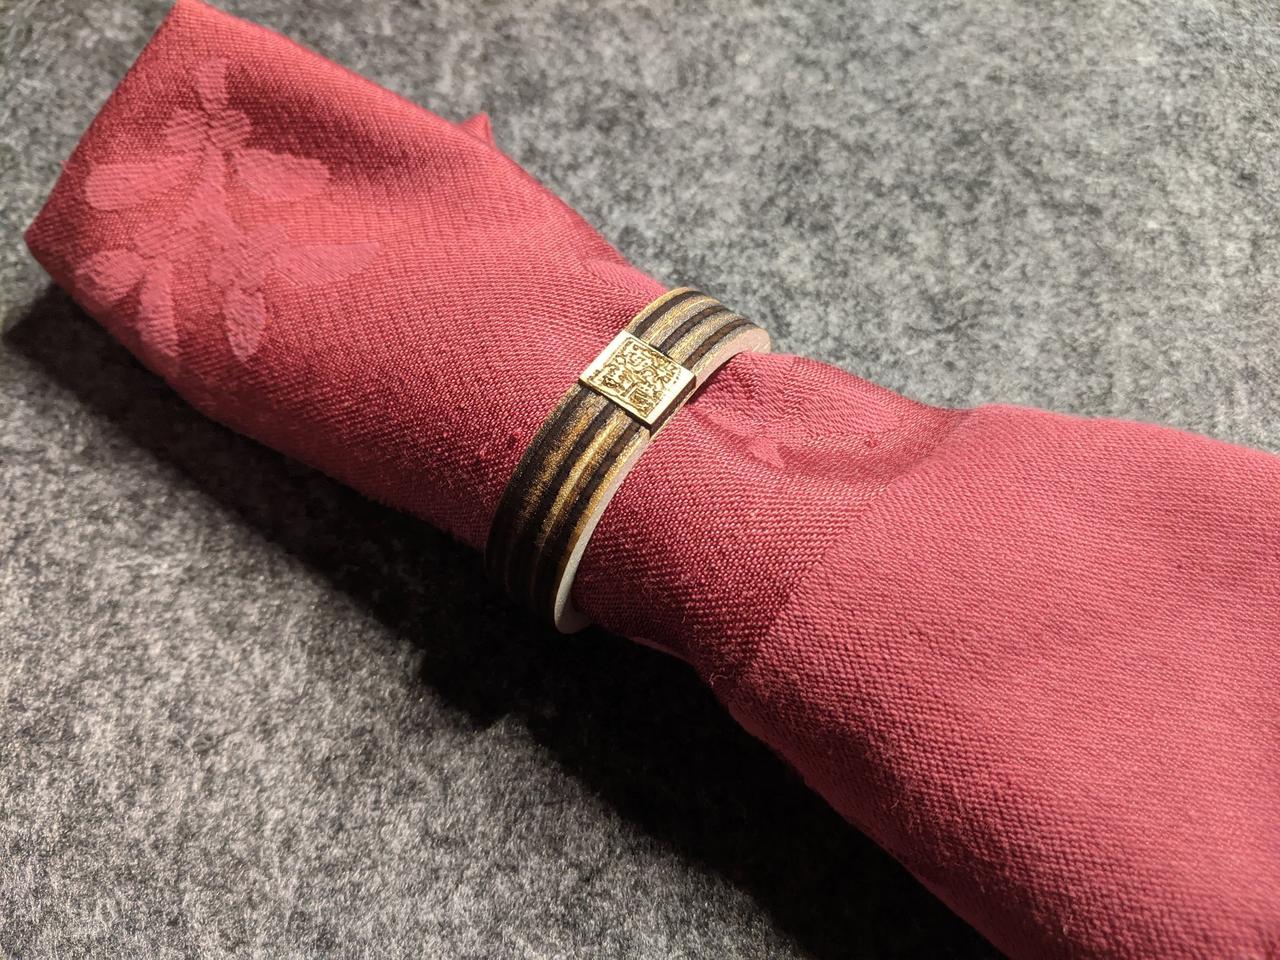 Napkin ring made from plywood